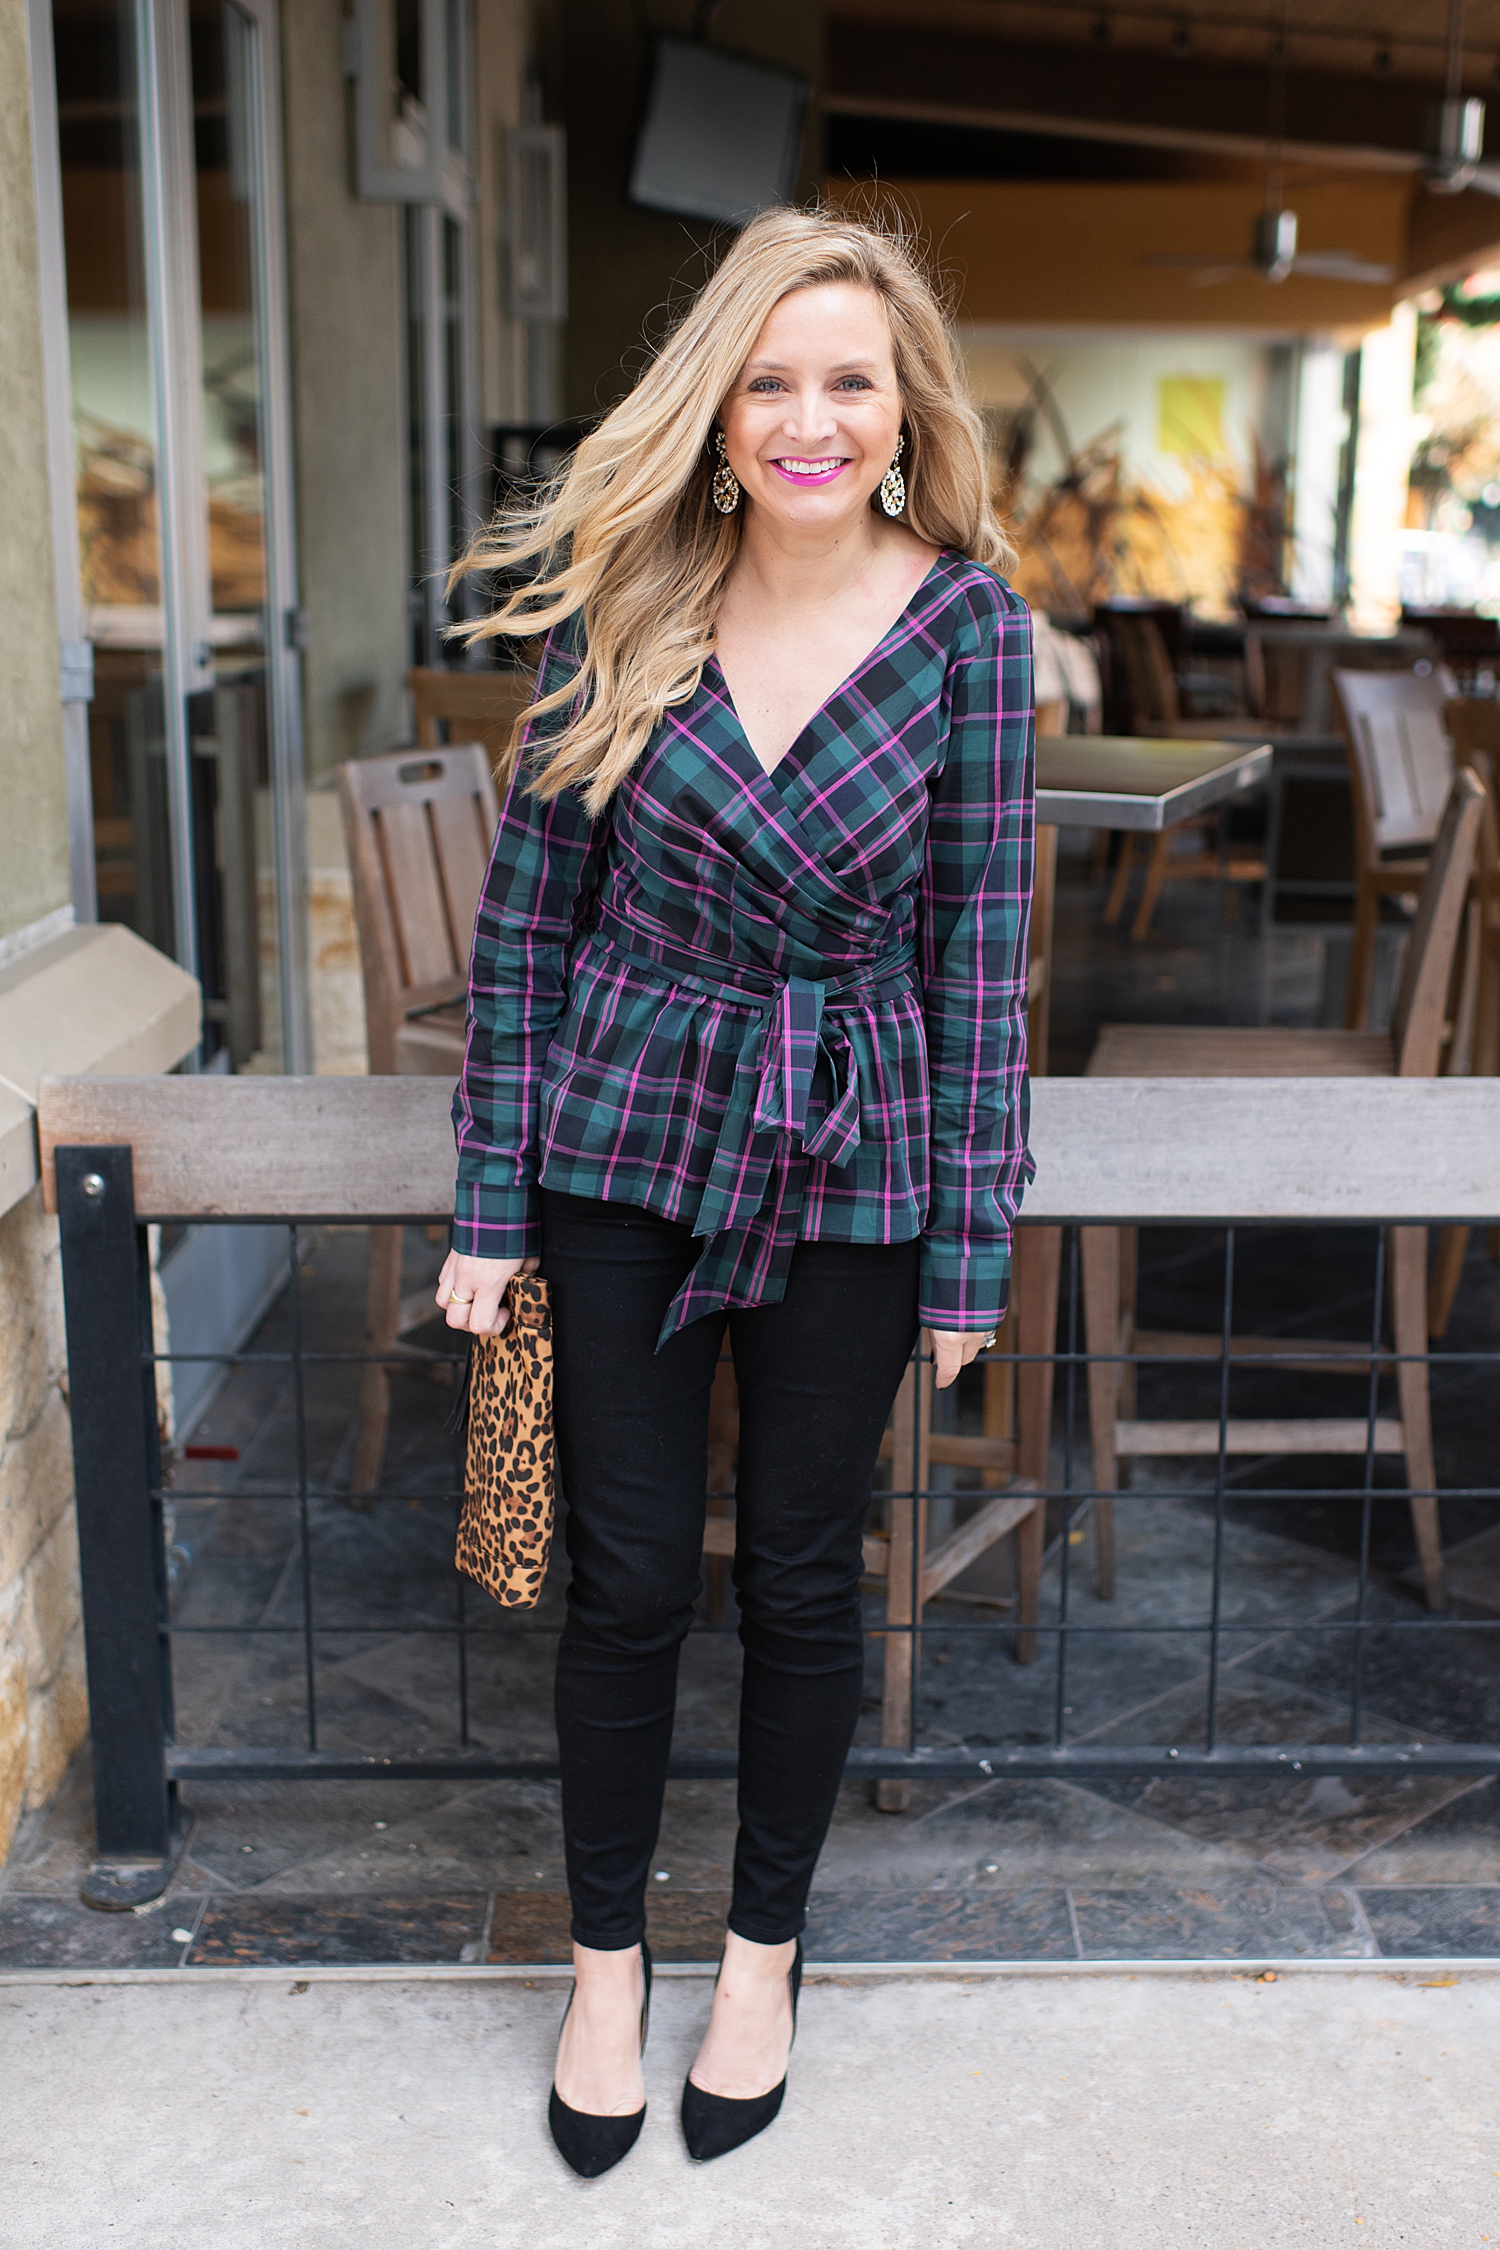 Top Houston fashion blogger, Fancy Ashley, features 7 Holiday Outfits perfect for the season: image of a woman wearing Plaid wrap top, black ankle skinny jeans, Kate Spade earrings, leopard clutch all available at Nordstrom